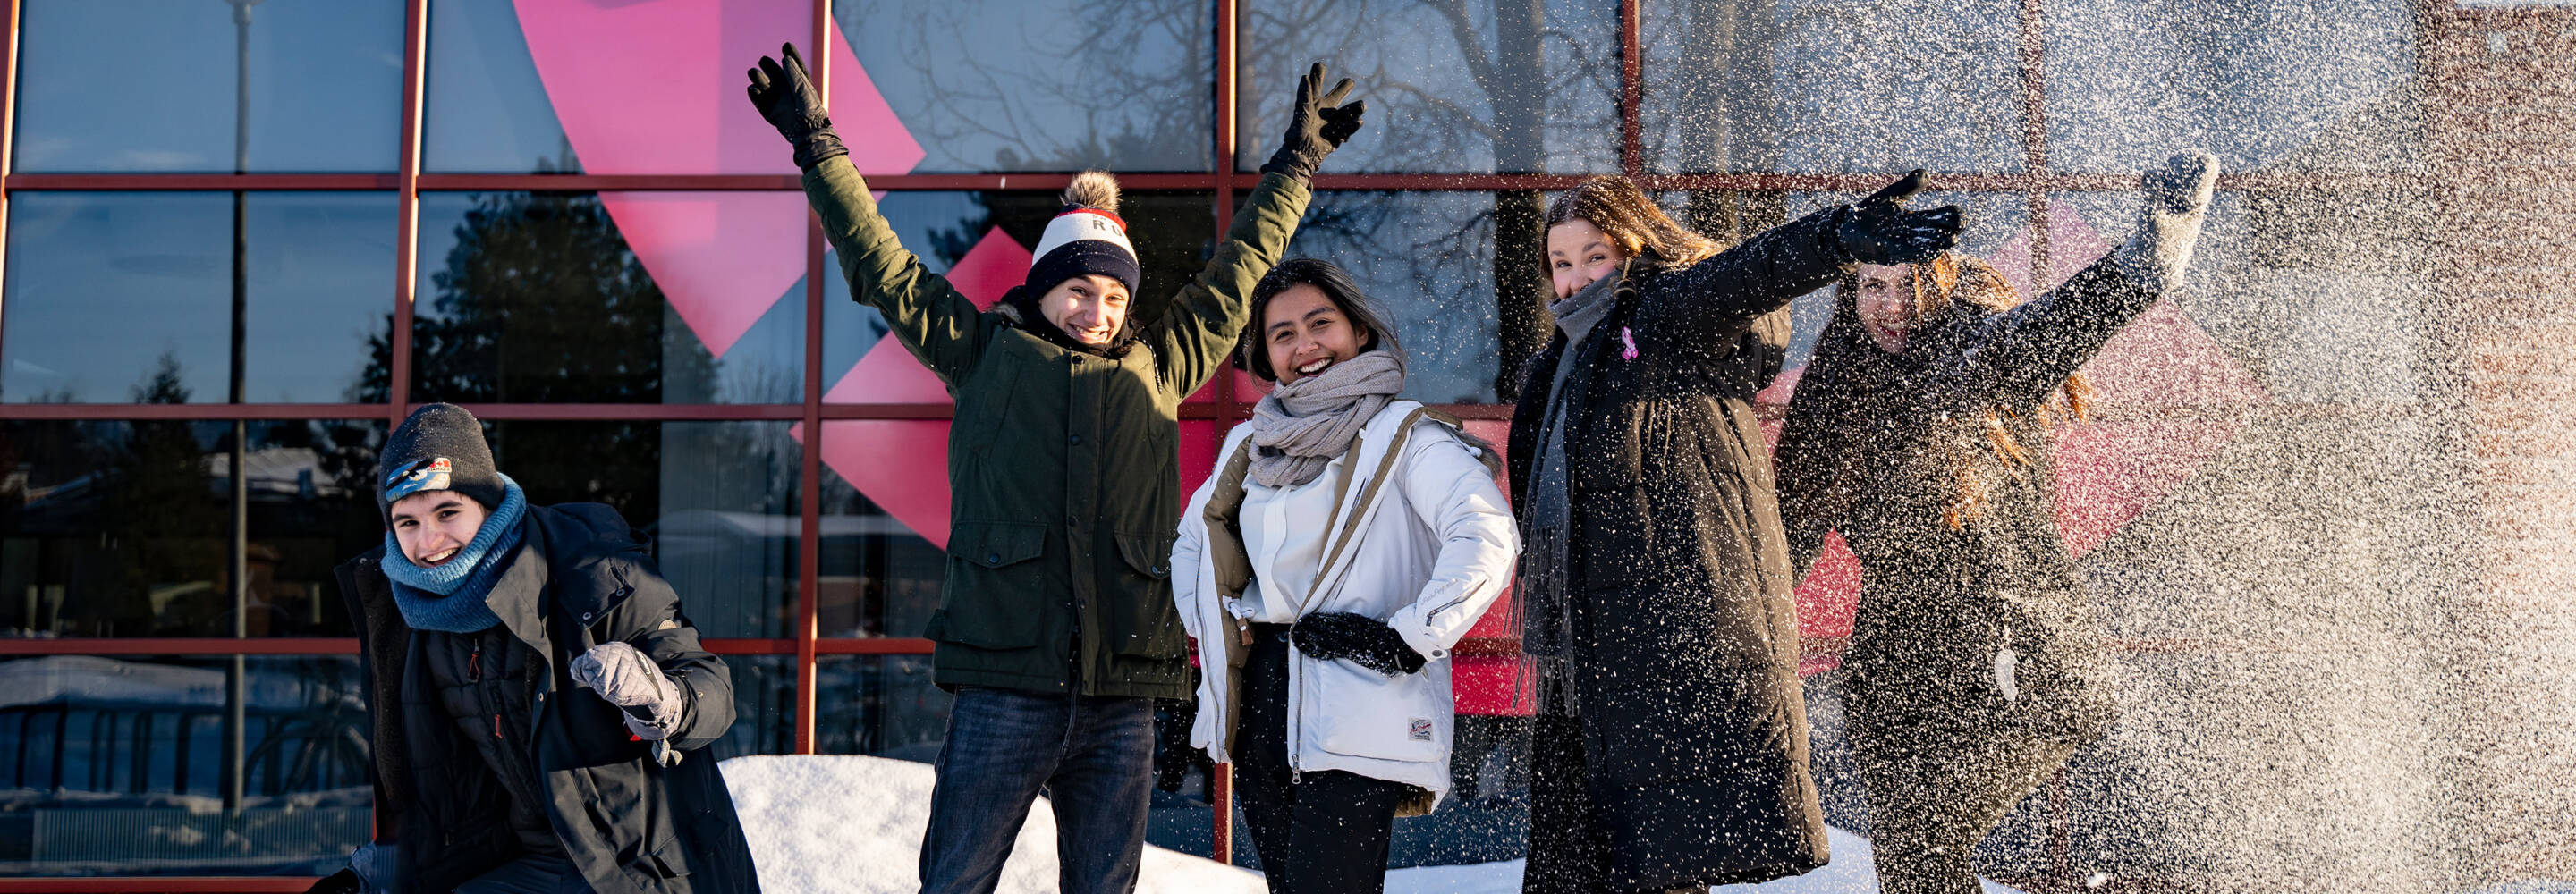 Group of international students pictured in front of Kokkola campus during winter